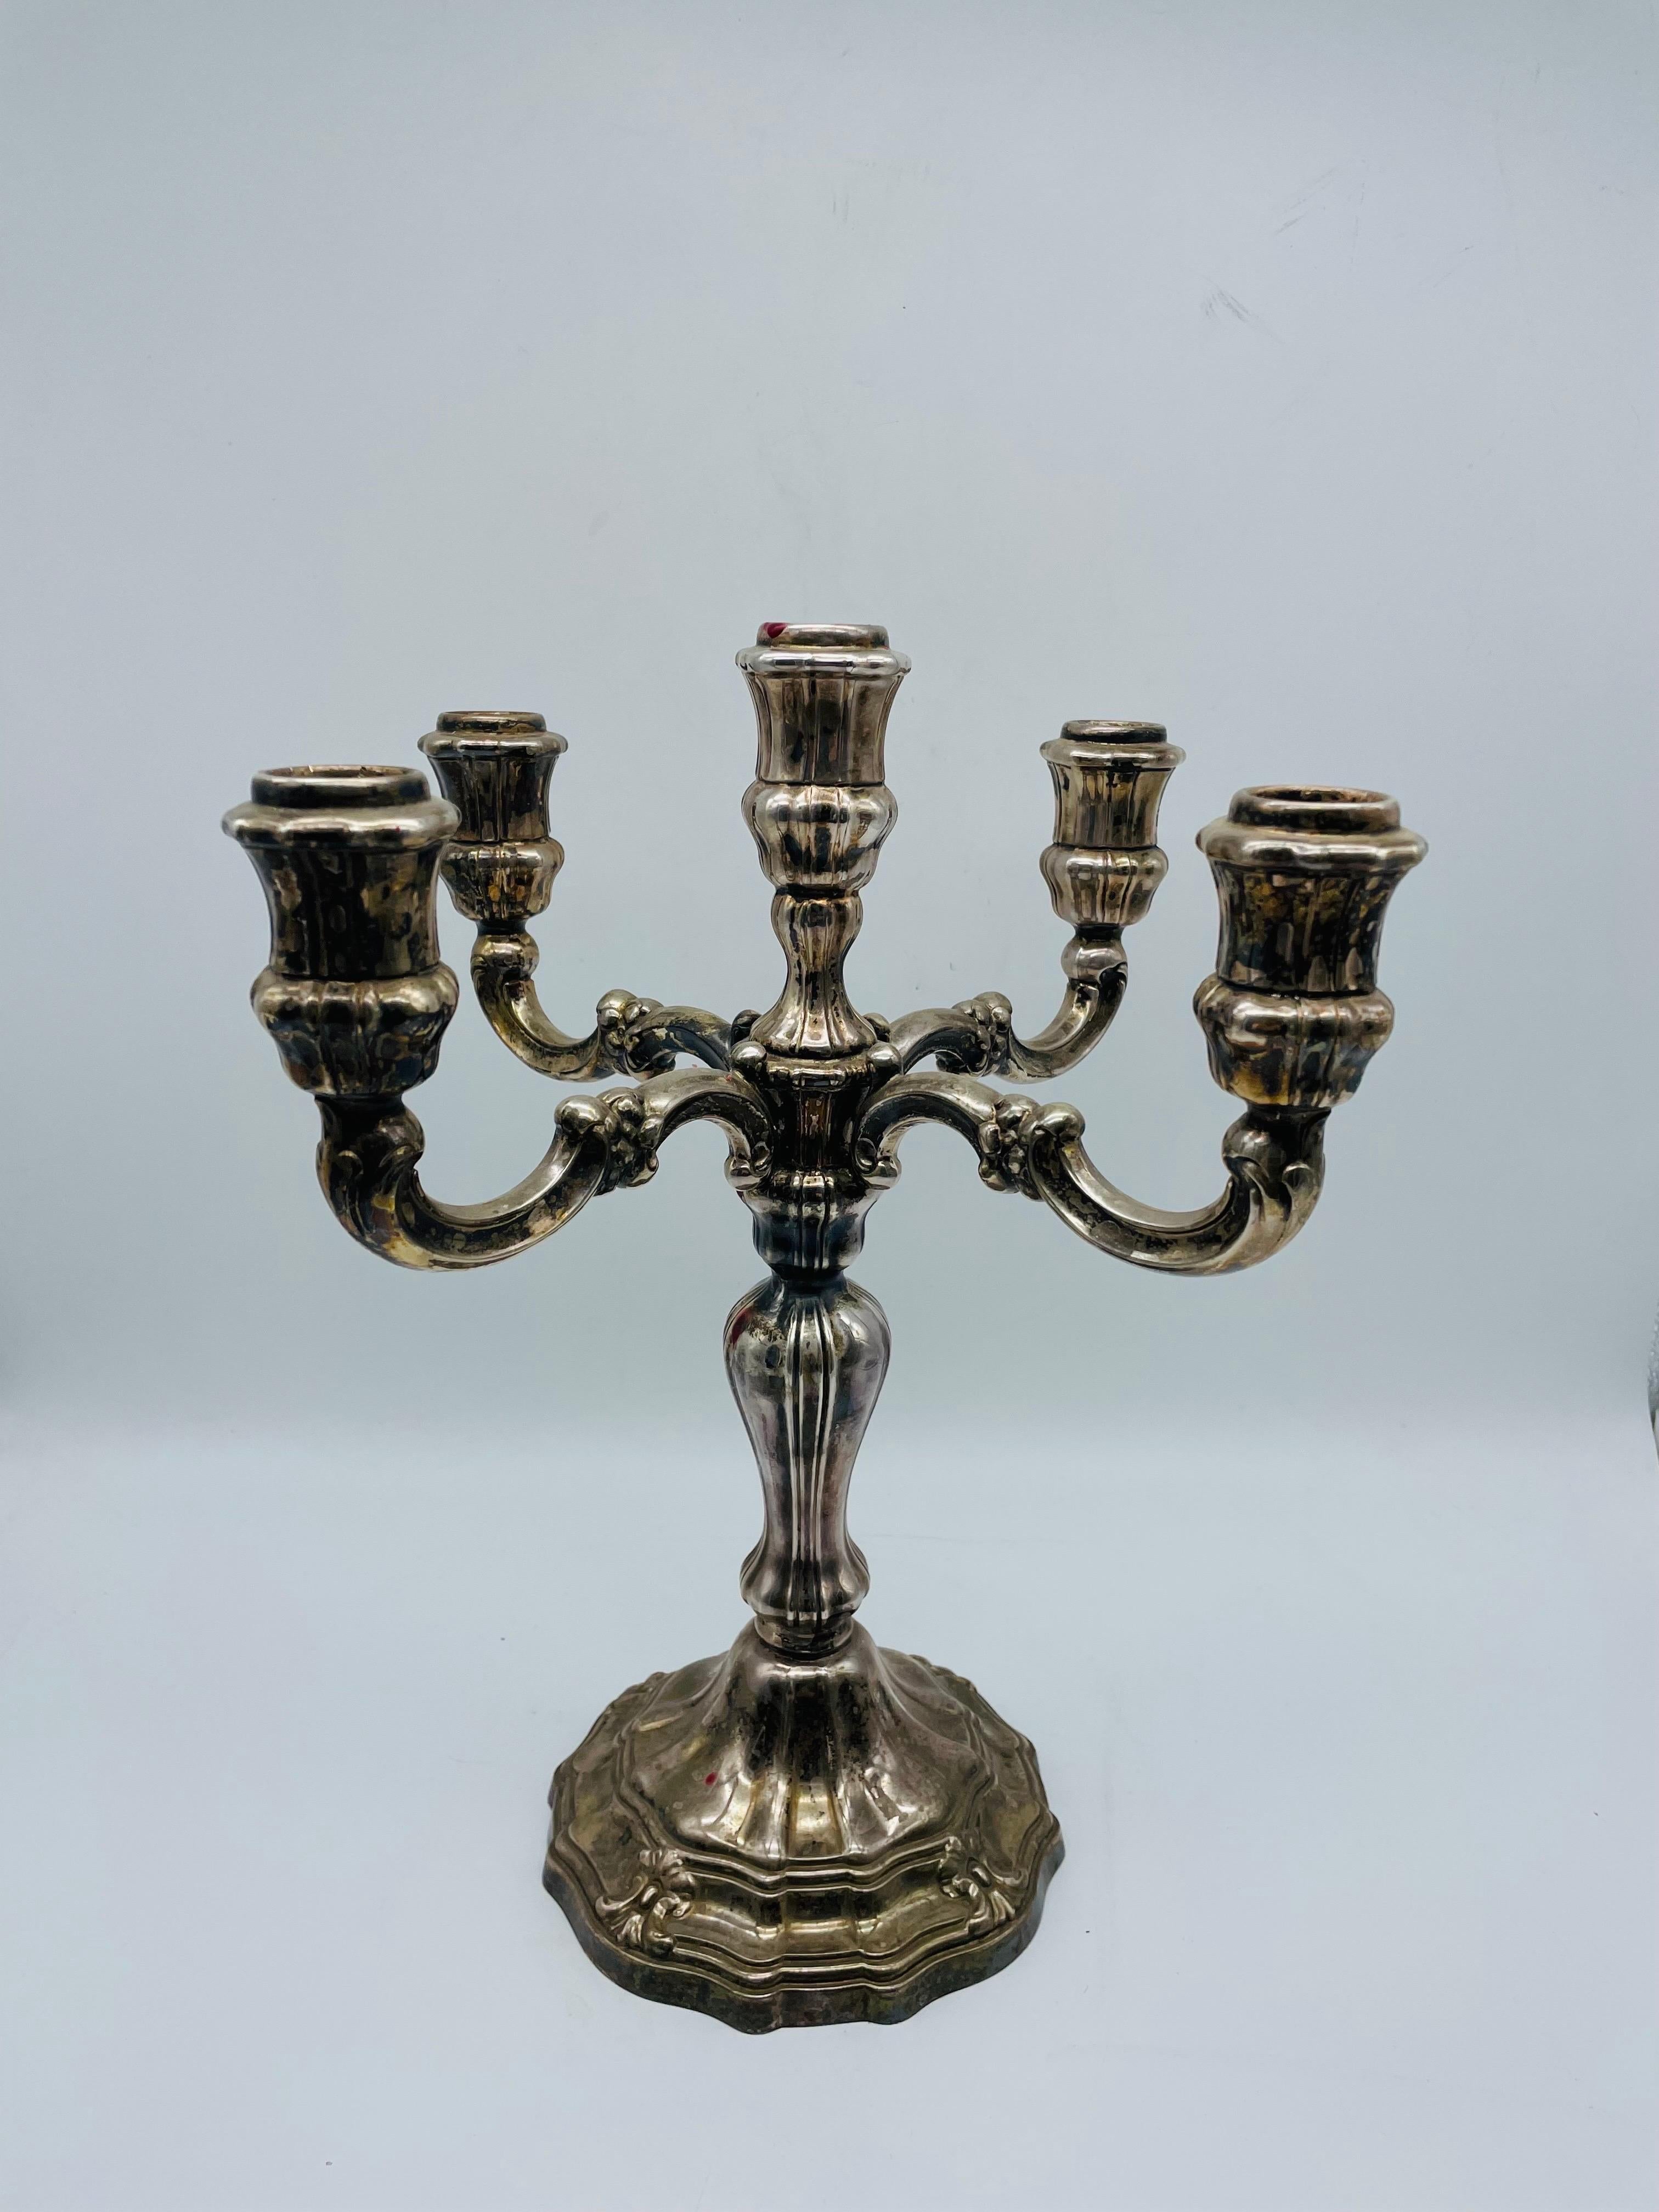 Large candlestick 925 sterling silver.

Multi-profiled candlestick made of 925 sterling silver with crescent moon and crown hallmark with 5 candle arms.